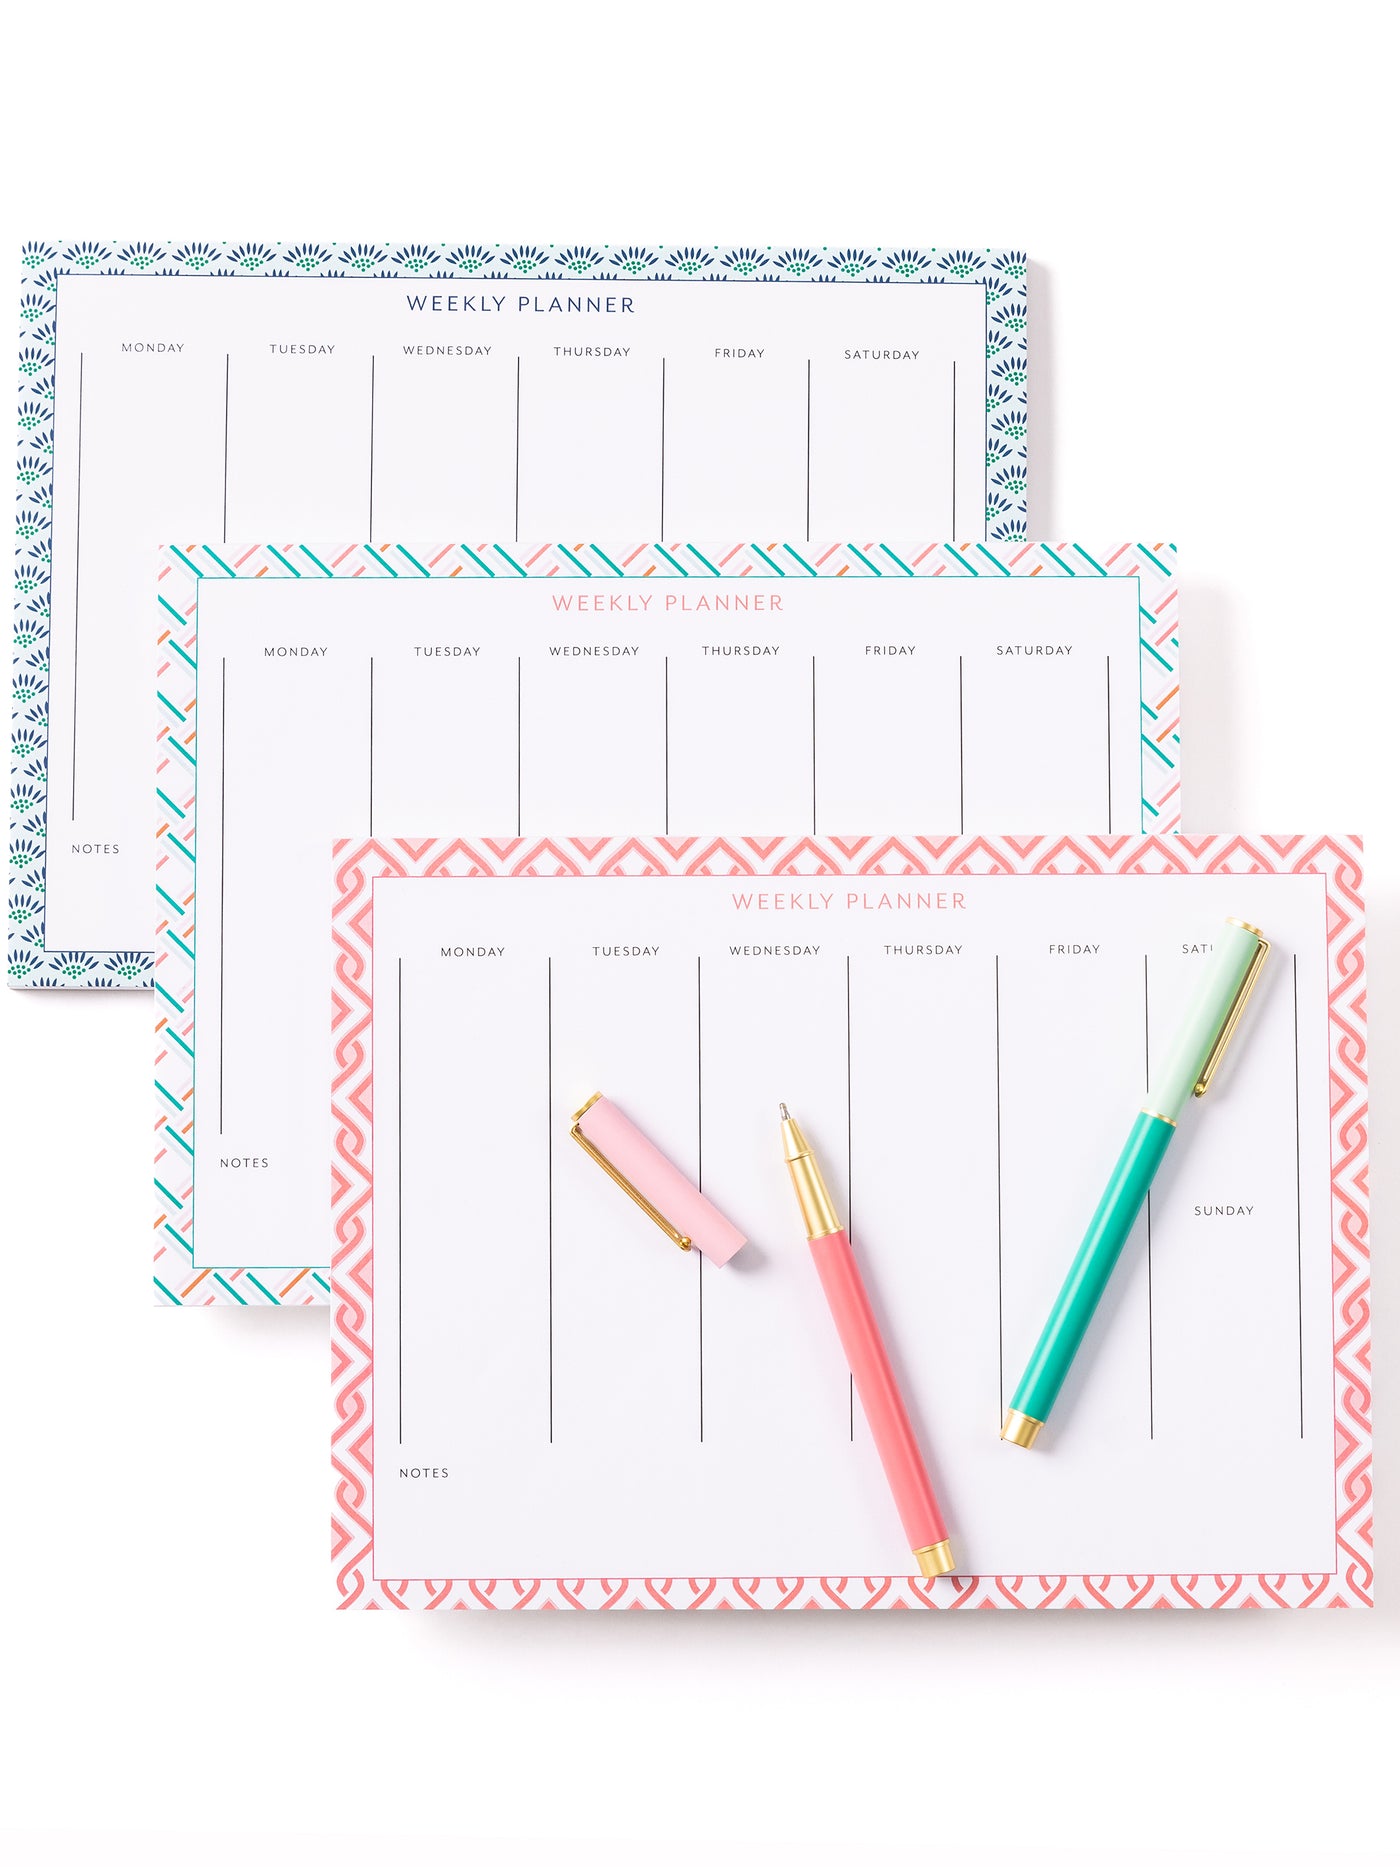 FINAL SALE - Weekly Desk Pad | Hold My Hand